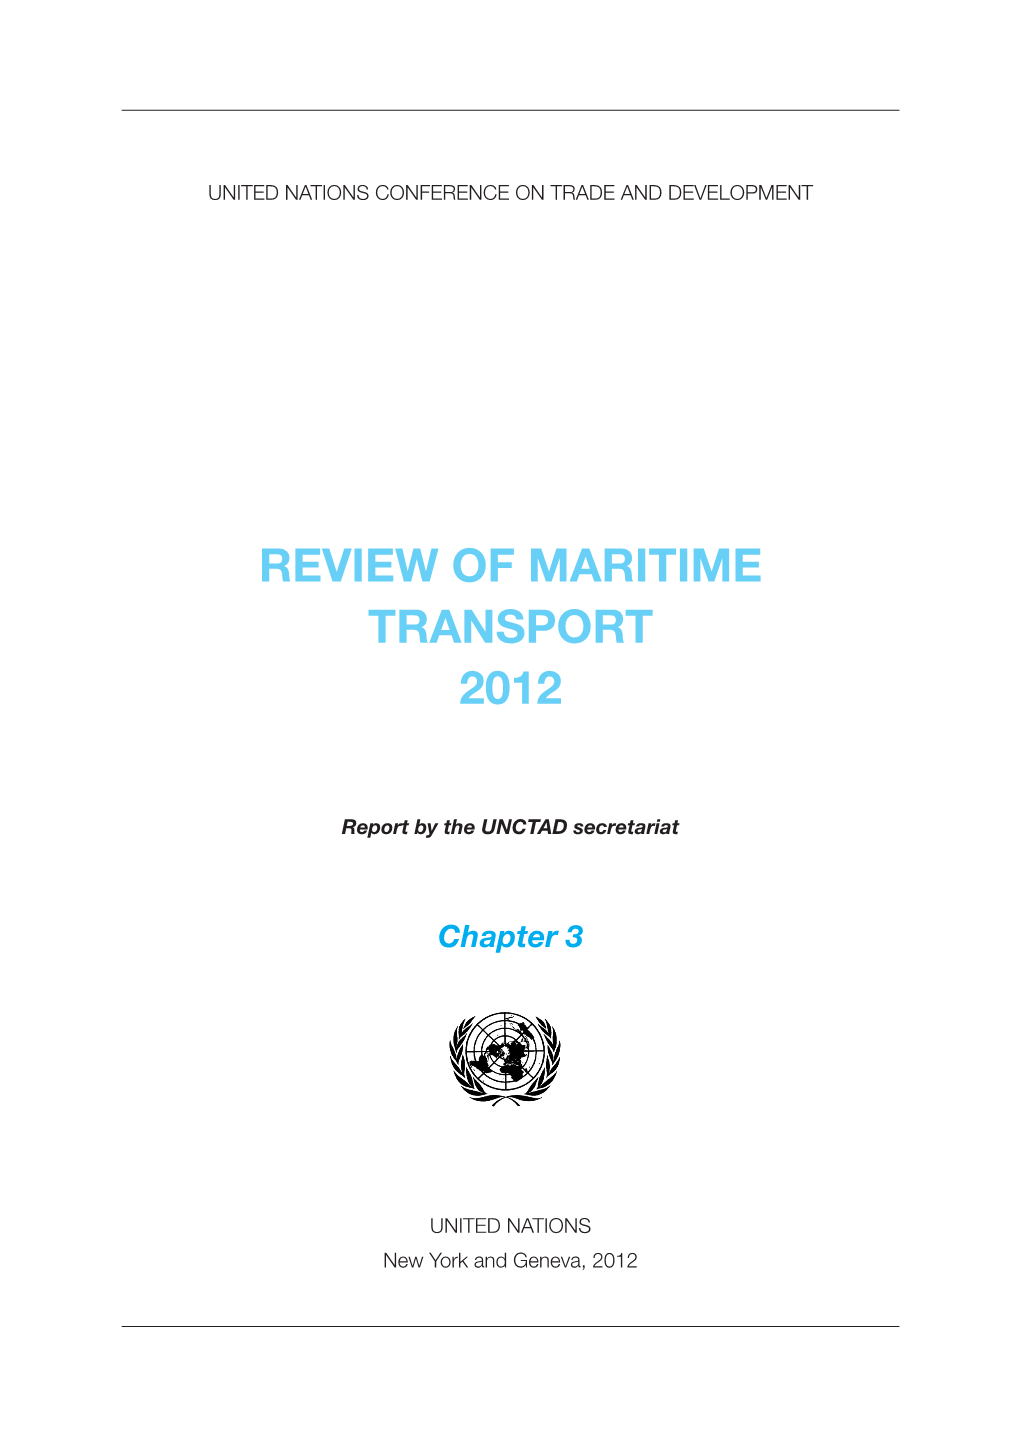 Chapter 3: Freight Rates and Maritime Transport Costs 59